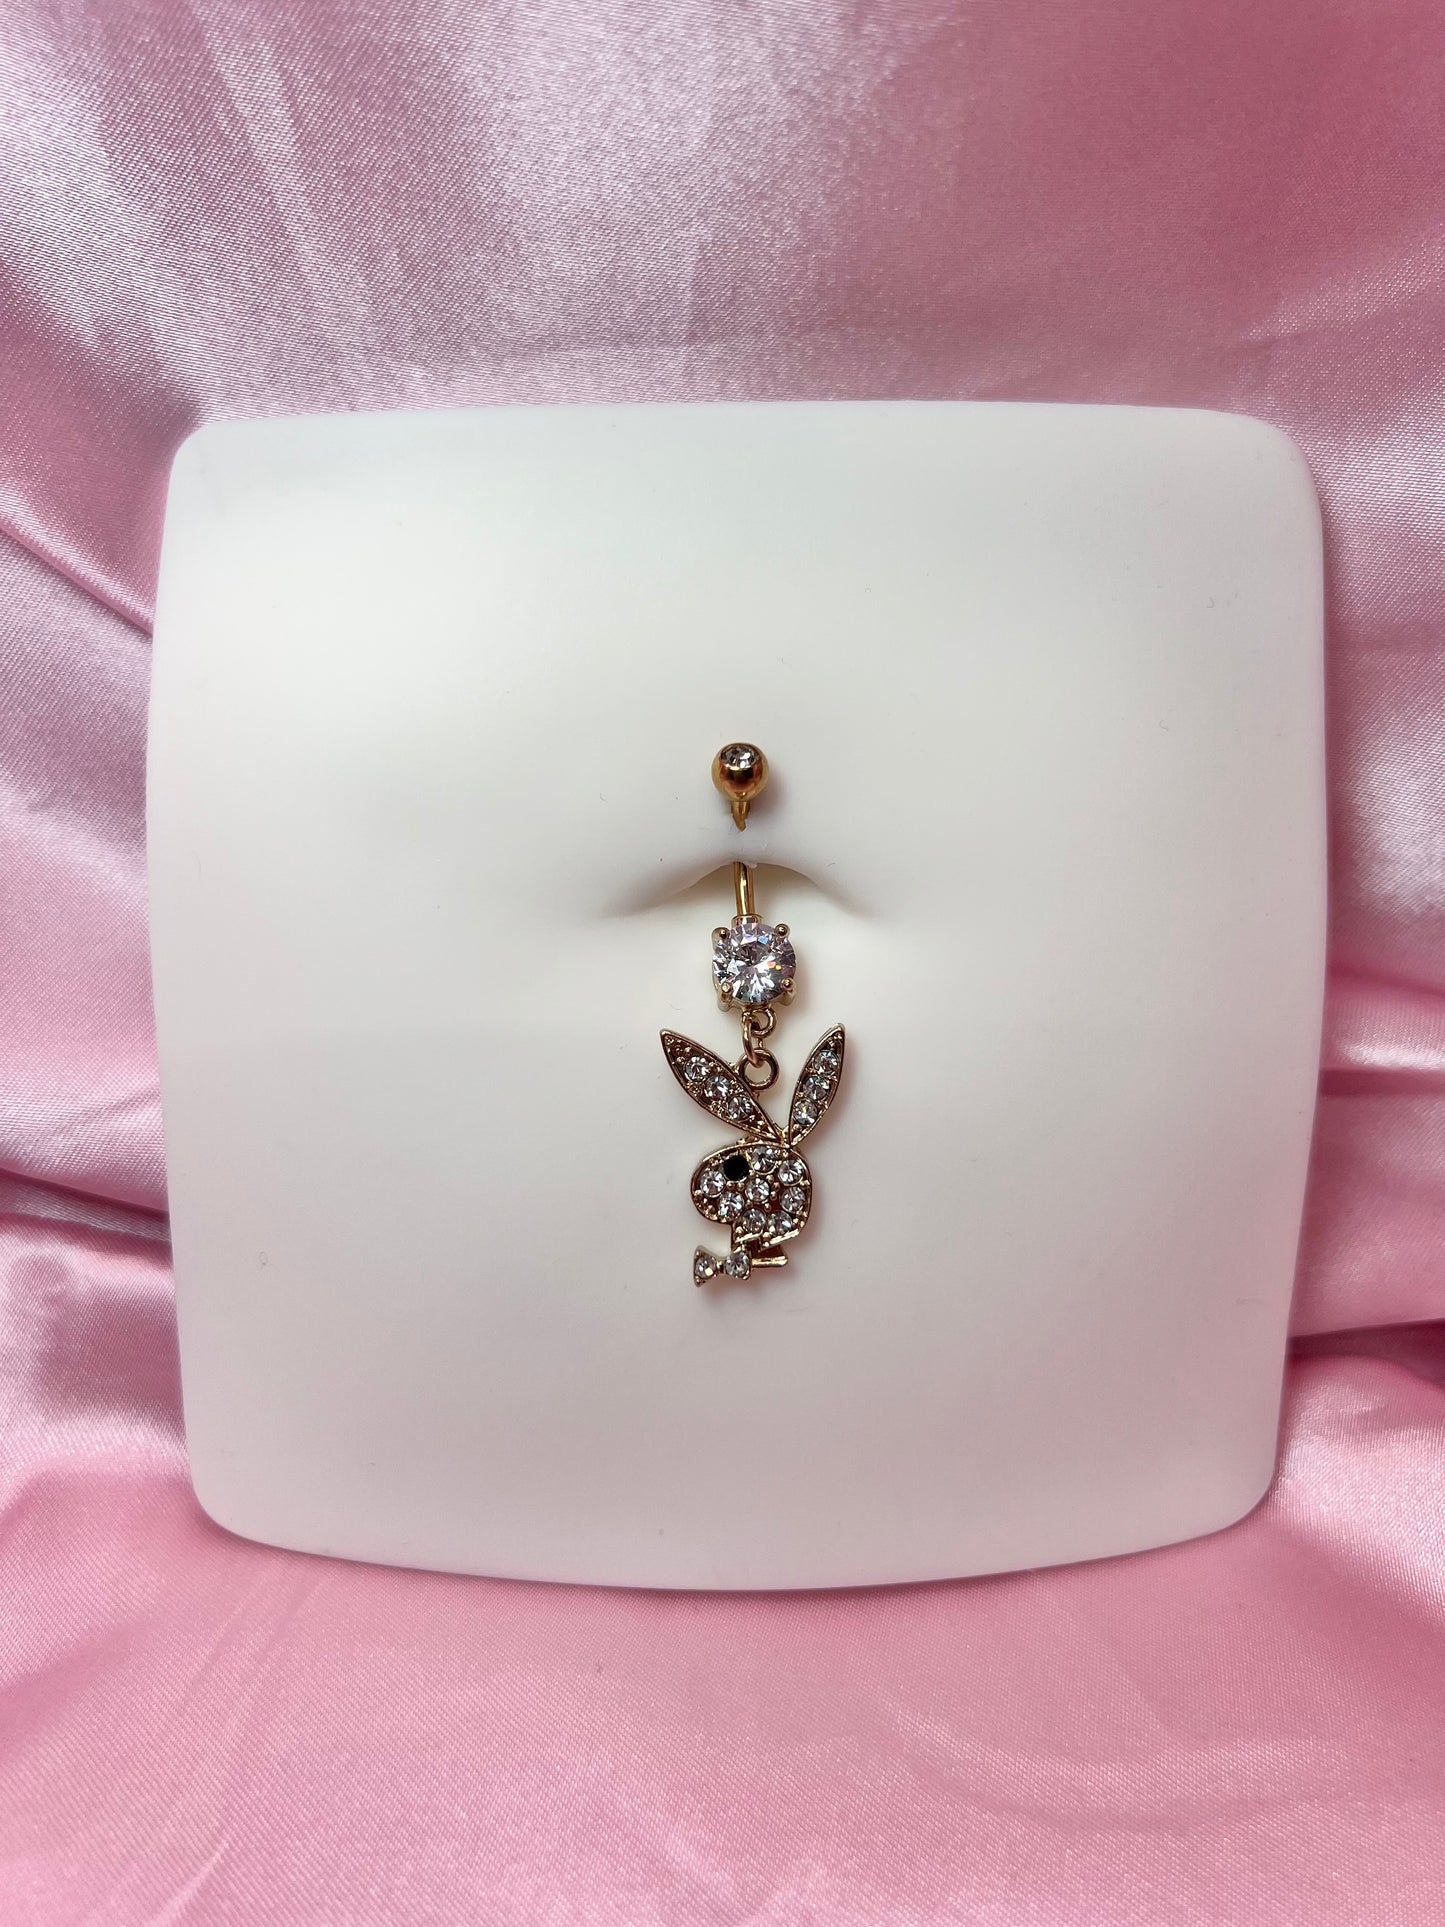 Icy bunny belly ring